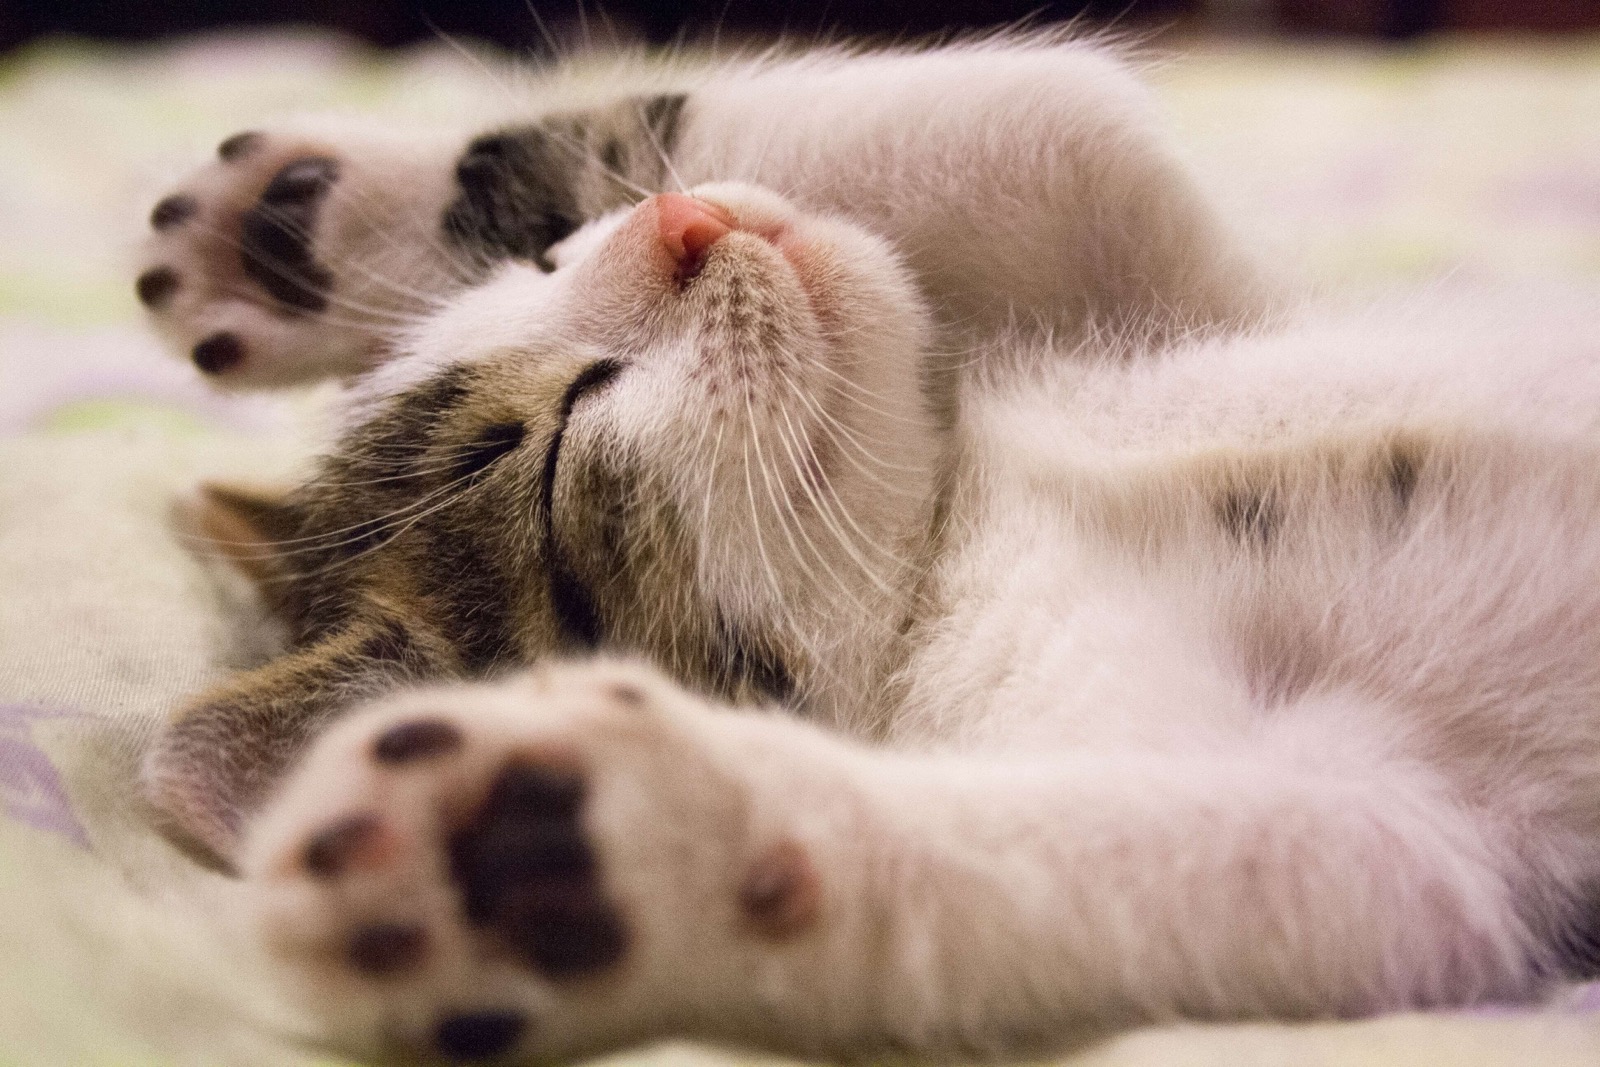 What Cat Personality Do You Have? Kitten Stretching